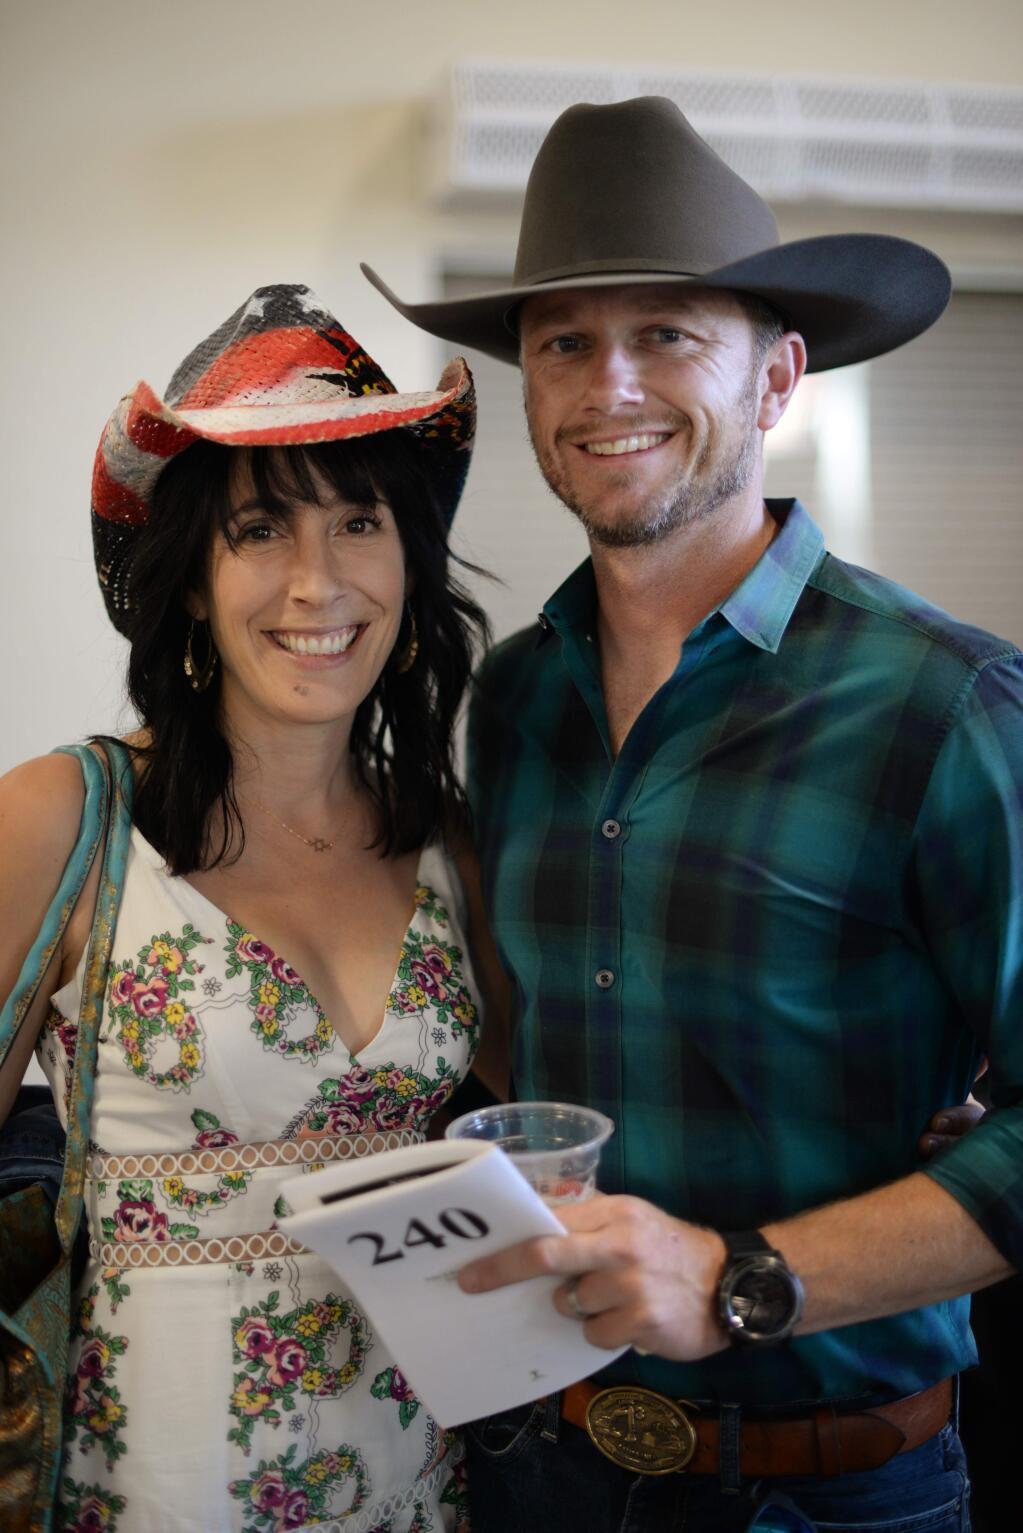 Jenny Levine-Smith and Bryan Levine-Smith at Harvest Hoedown, a benefit for mental health services provider LifeWorks, held Saturday at Saralee and Richard's Barn at Sonoma County Fairgrounds in Santa Rosa, California. September 22, 2018.(Photo: Erik Castro/for The Press Democrat)